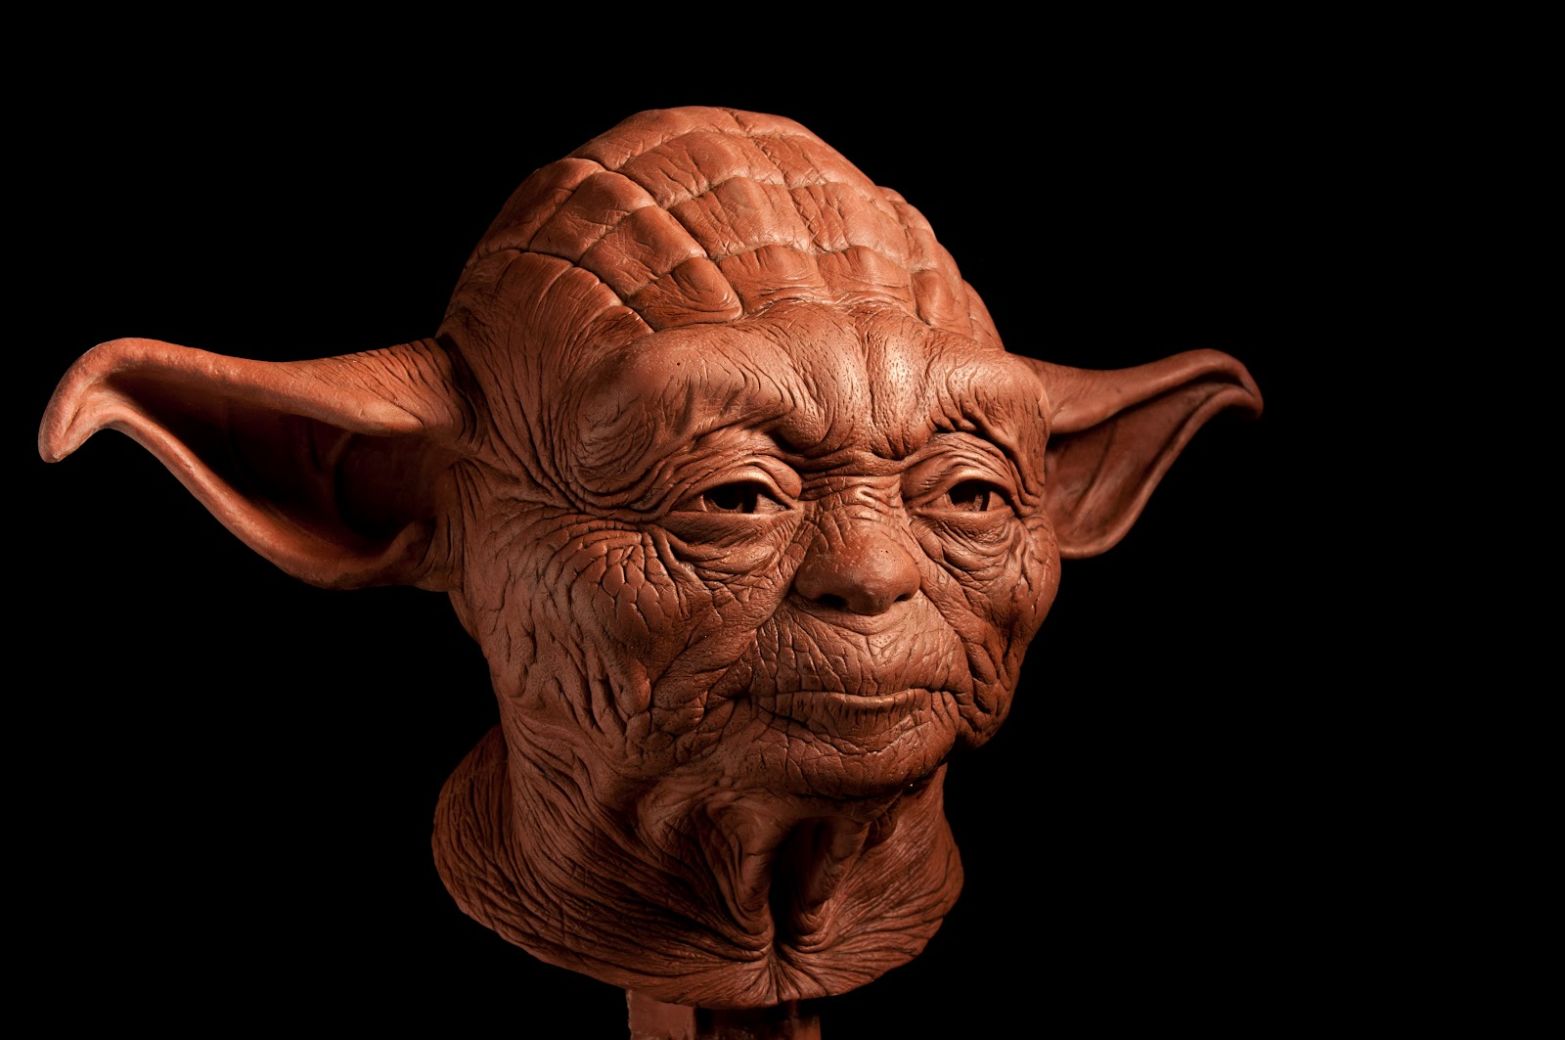 Yoda with human skin is unsettlingly realistic